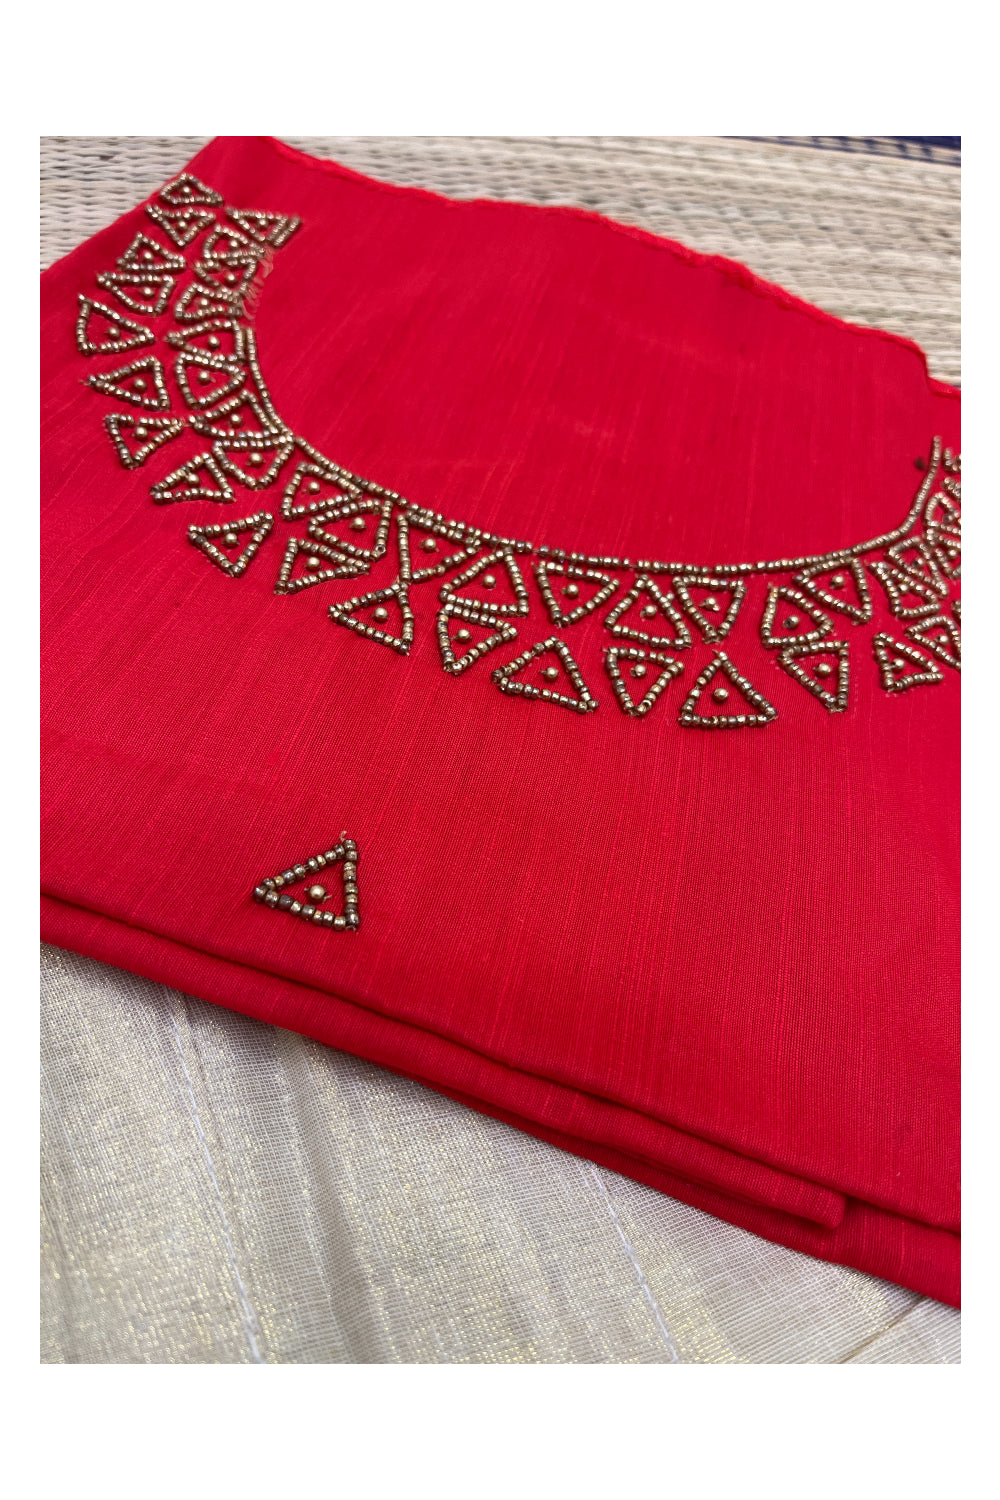 Semi Stitched Pavada Blouse with Tissue and Red Bead Works